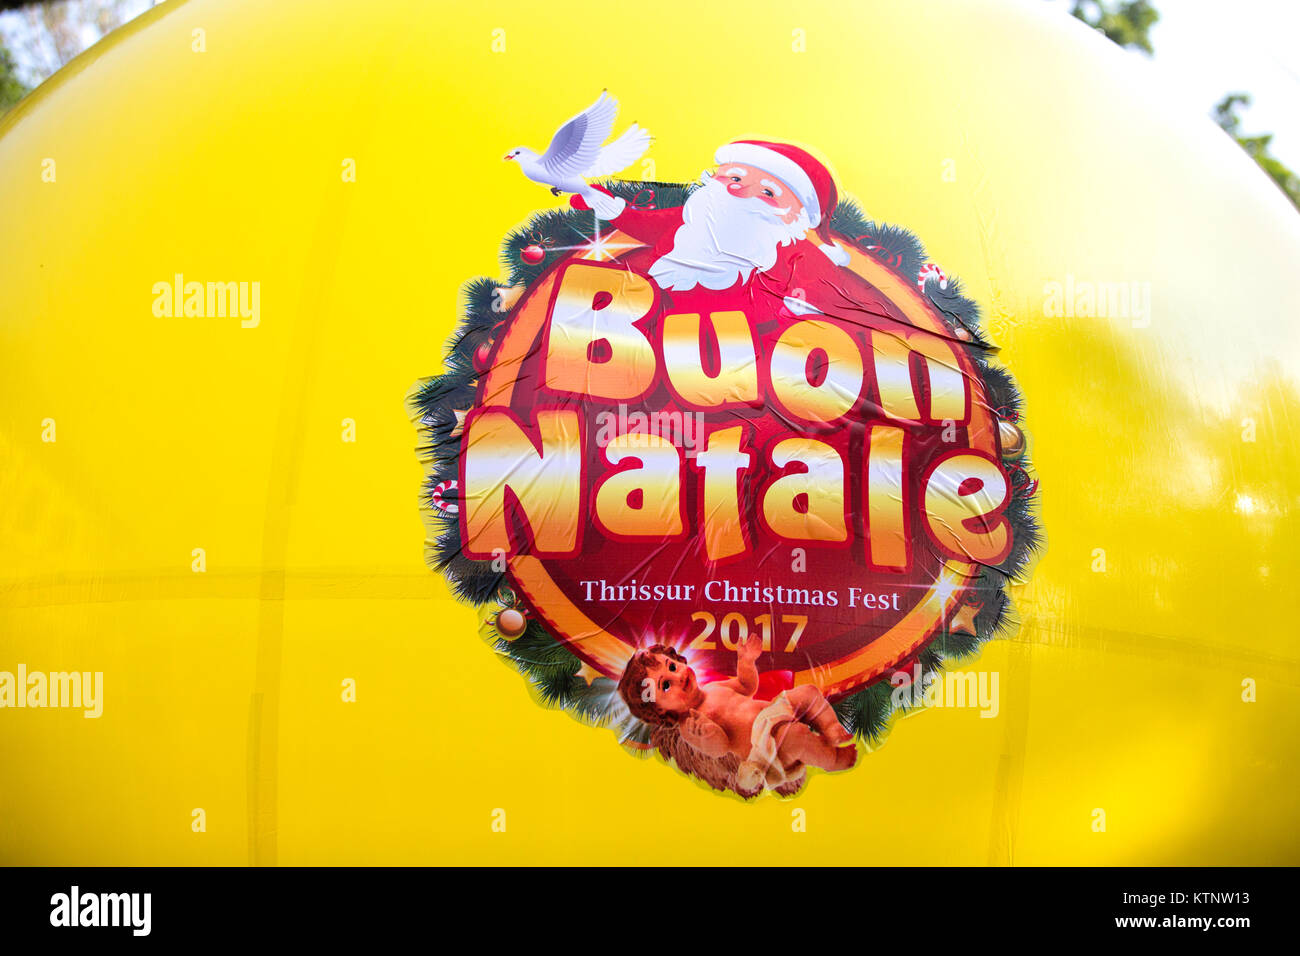 Buon Natale Kerala.Buon Natale Thrissur High Resolution Stock Photography And Images Alamy